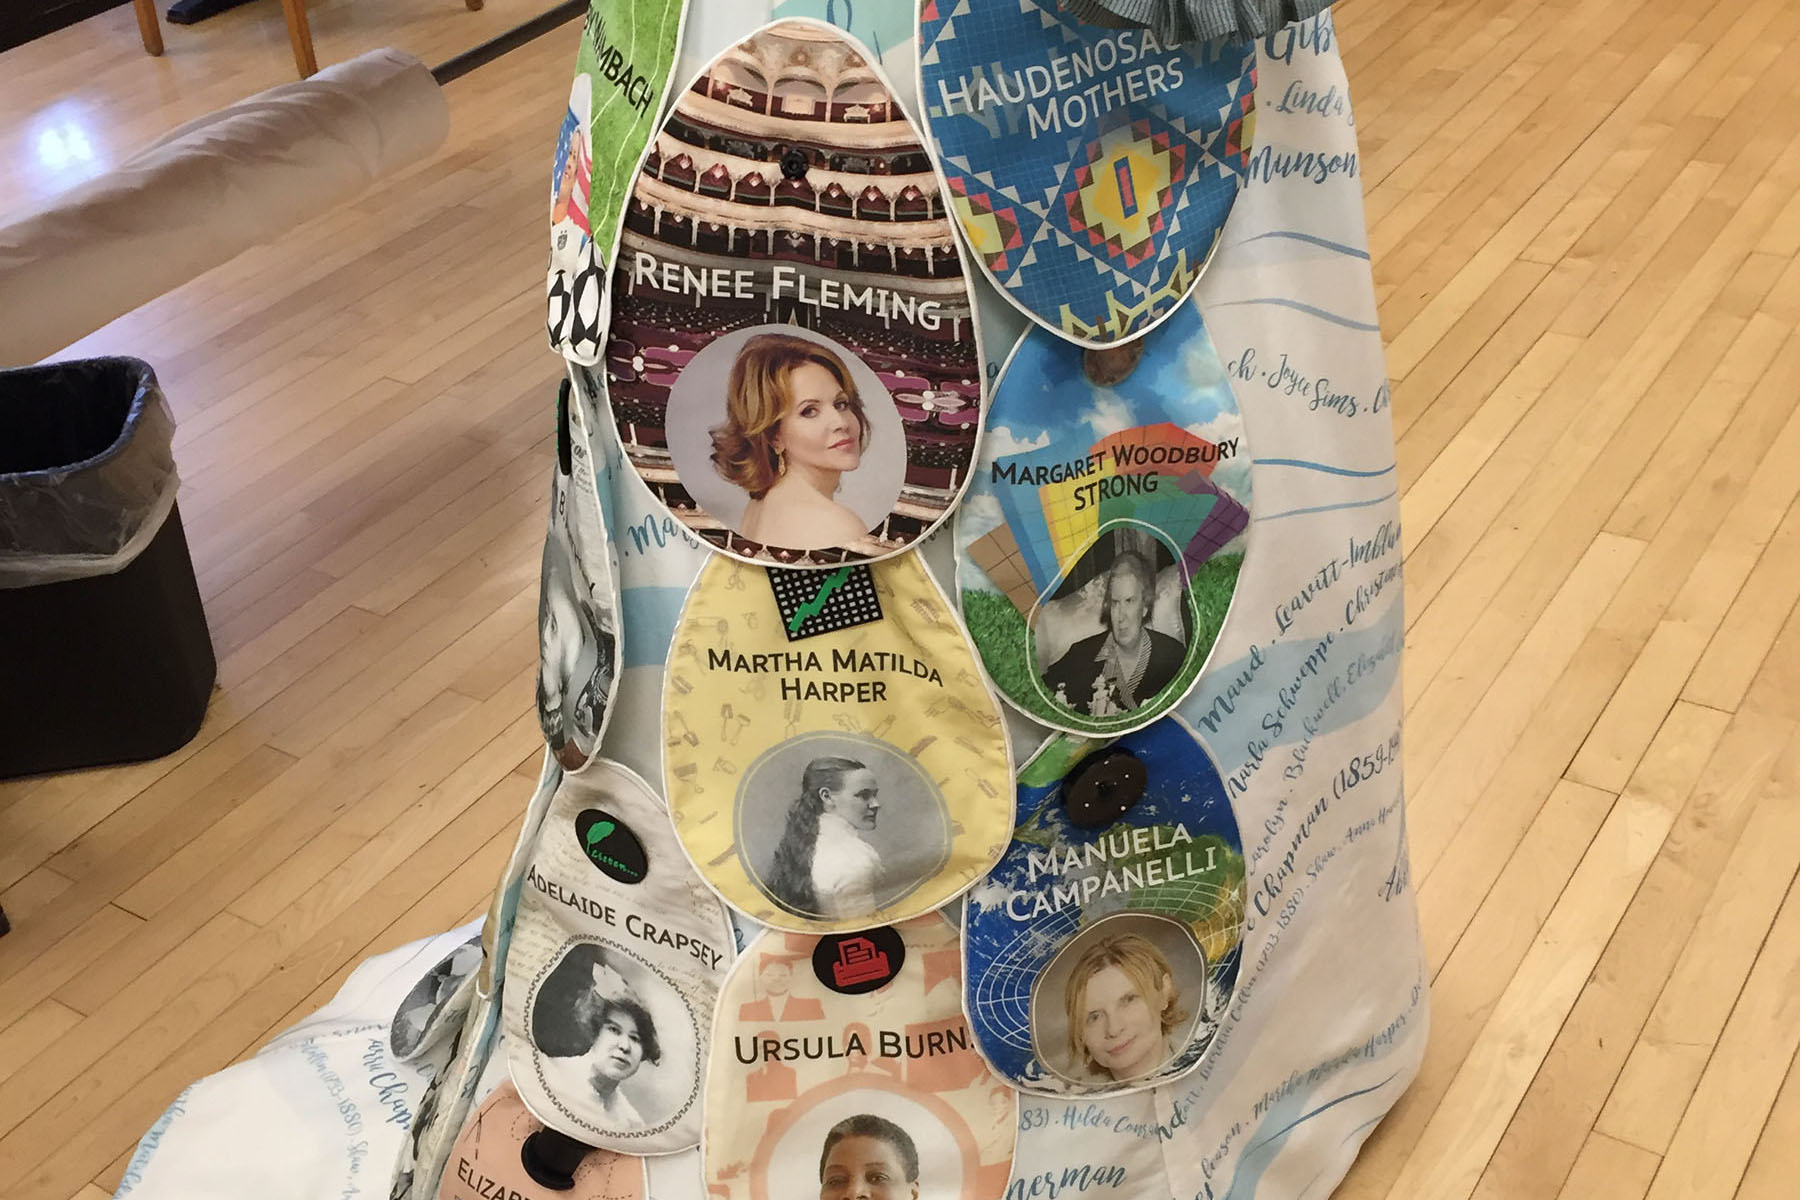 A 3D printed dress with names and images of famous women from Rochester.